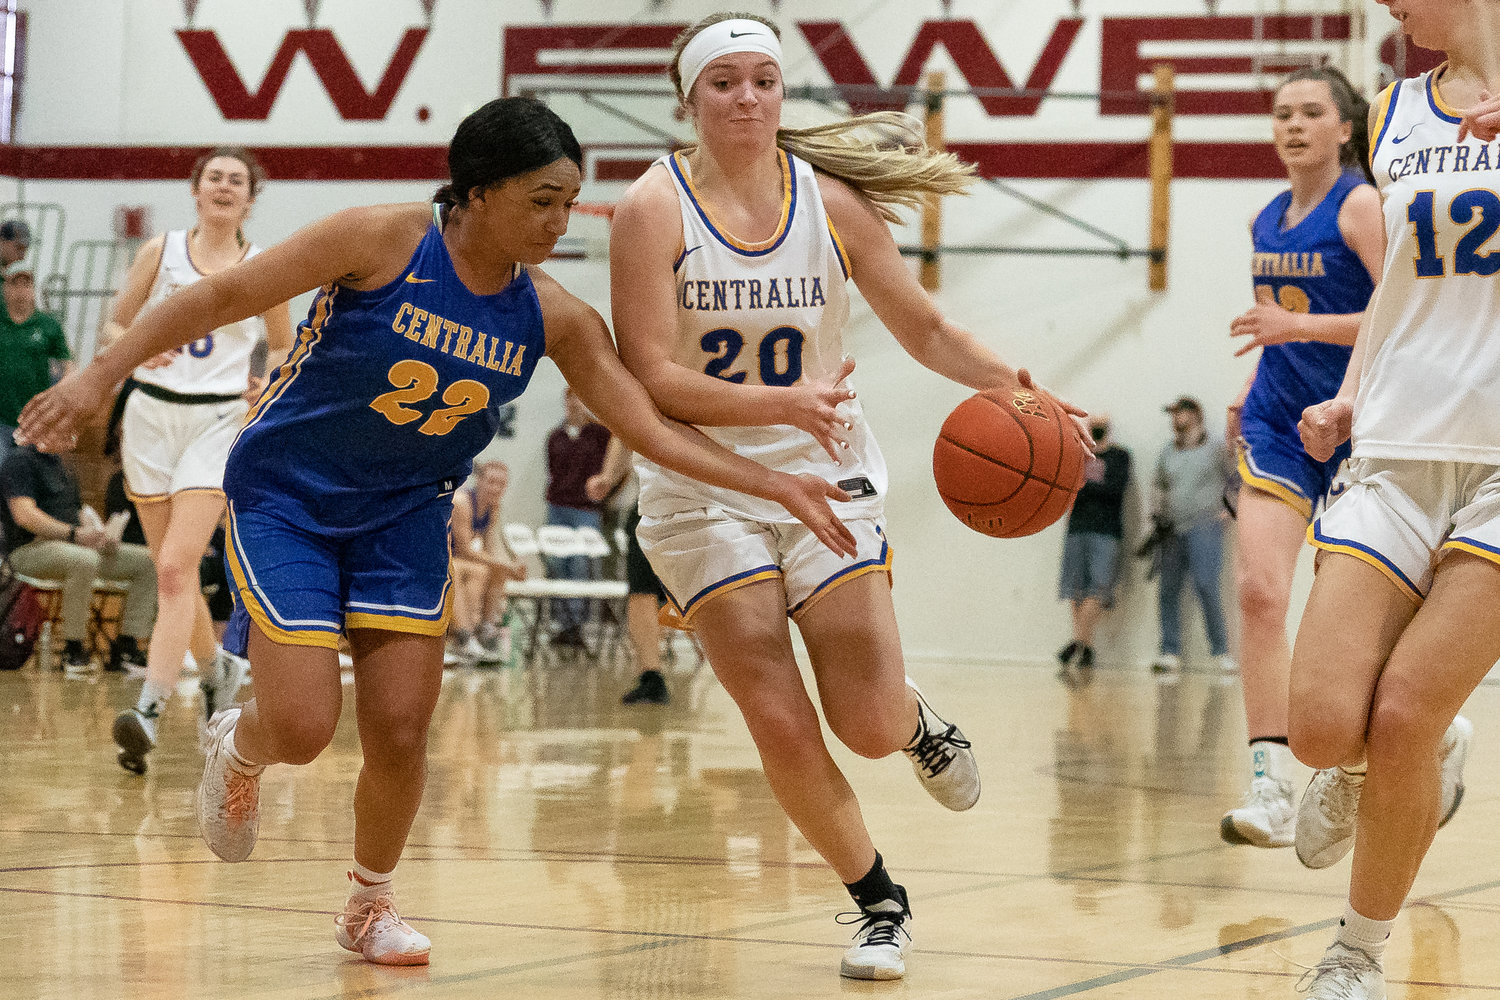 Adna guard Kaylin Todd drives at the SWW Senior All-Star Game March 26 at W.F. West.